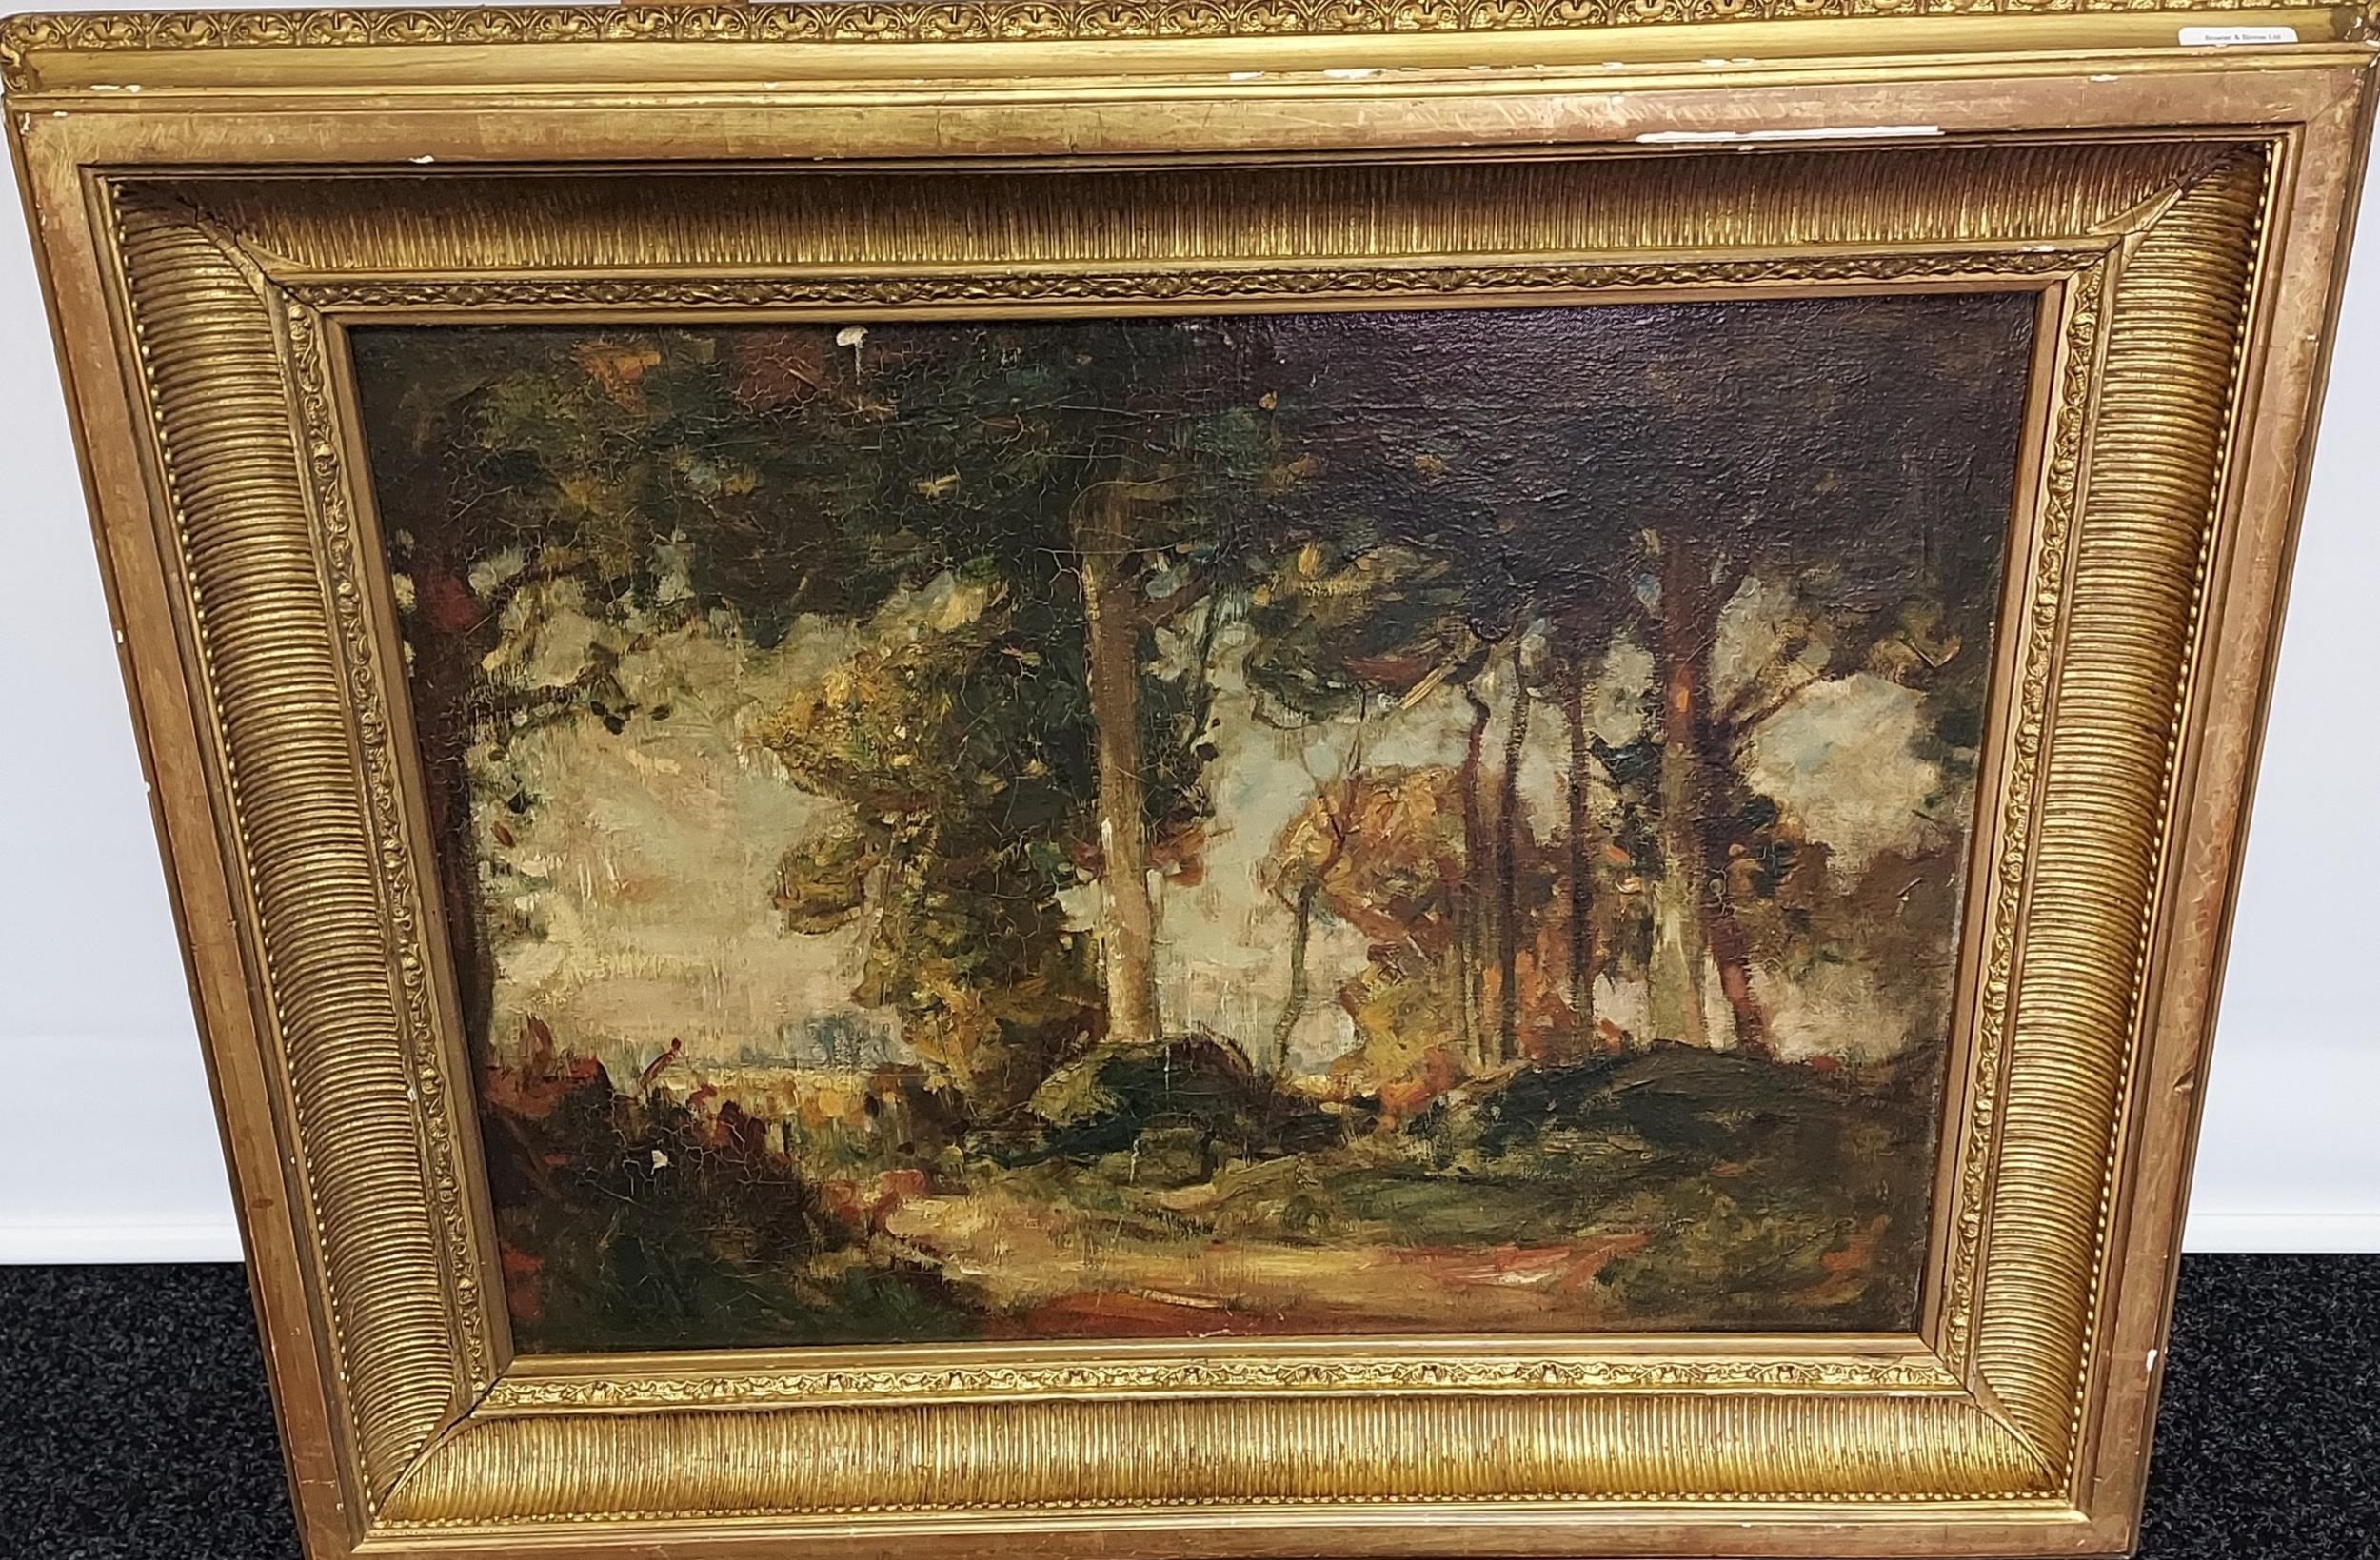 A 19th century Oil painting on canvas depicting woodland scene. Fitted within an ornate gilt